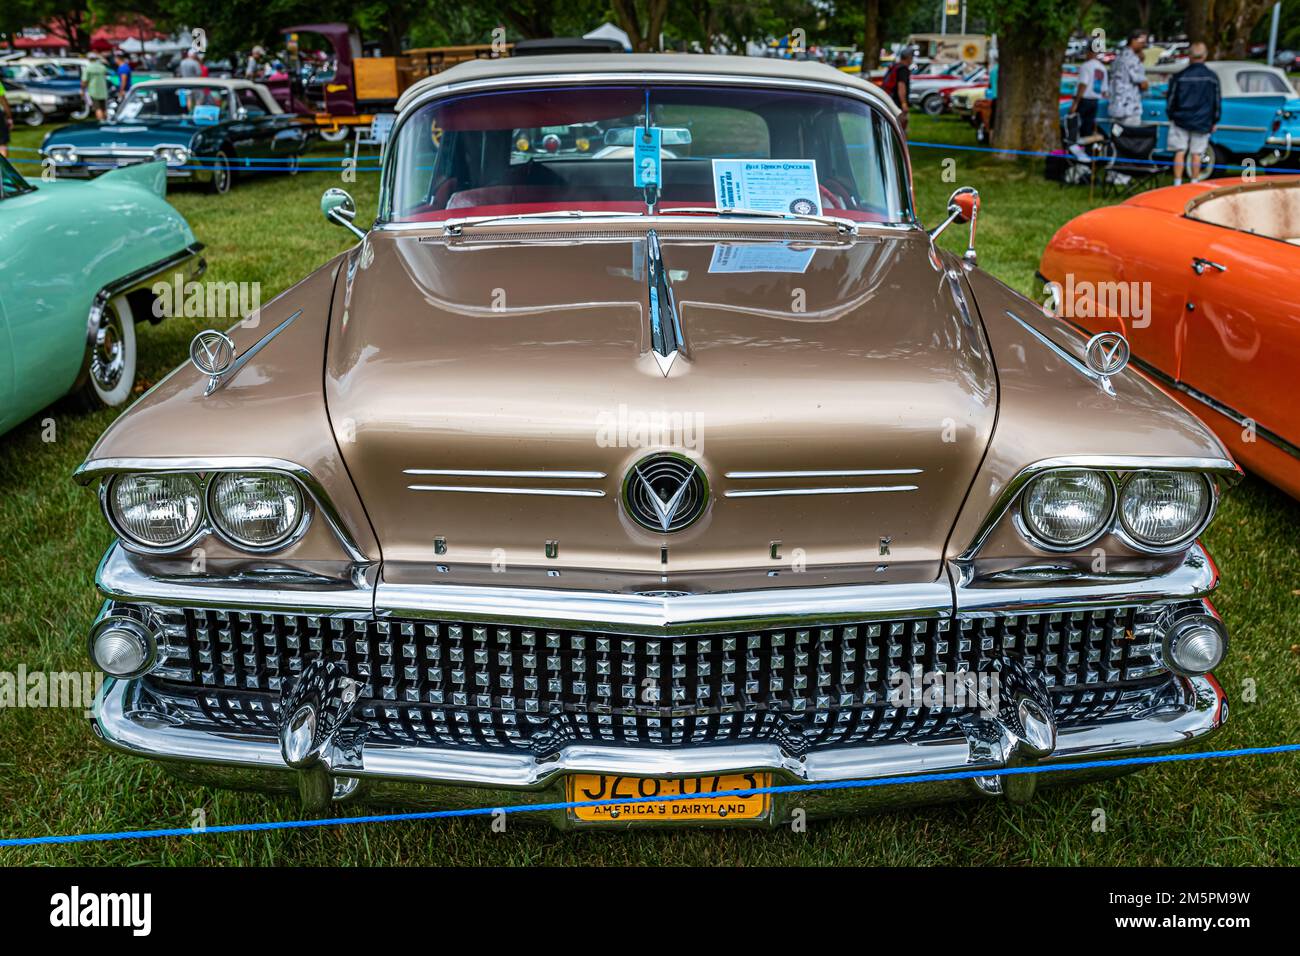 Iola, WI - July 07, 2022: High perspective front view of a 1958 Buick Century Convertible at a local car show. Stock Photo